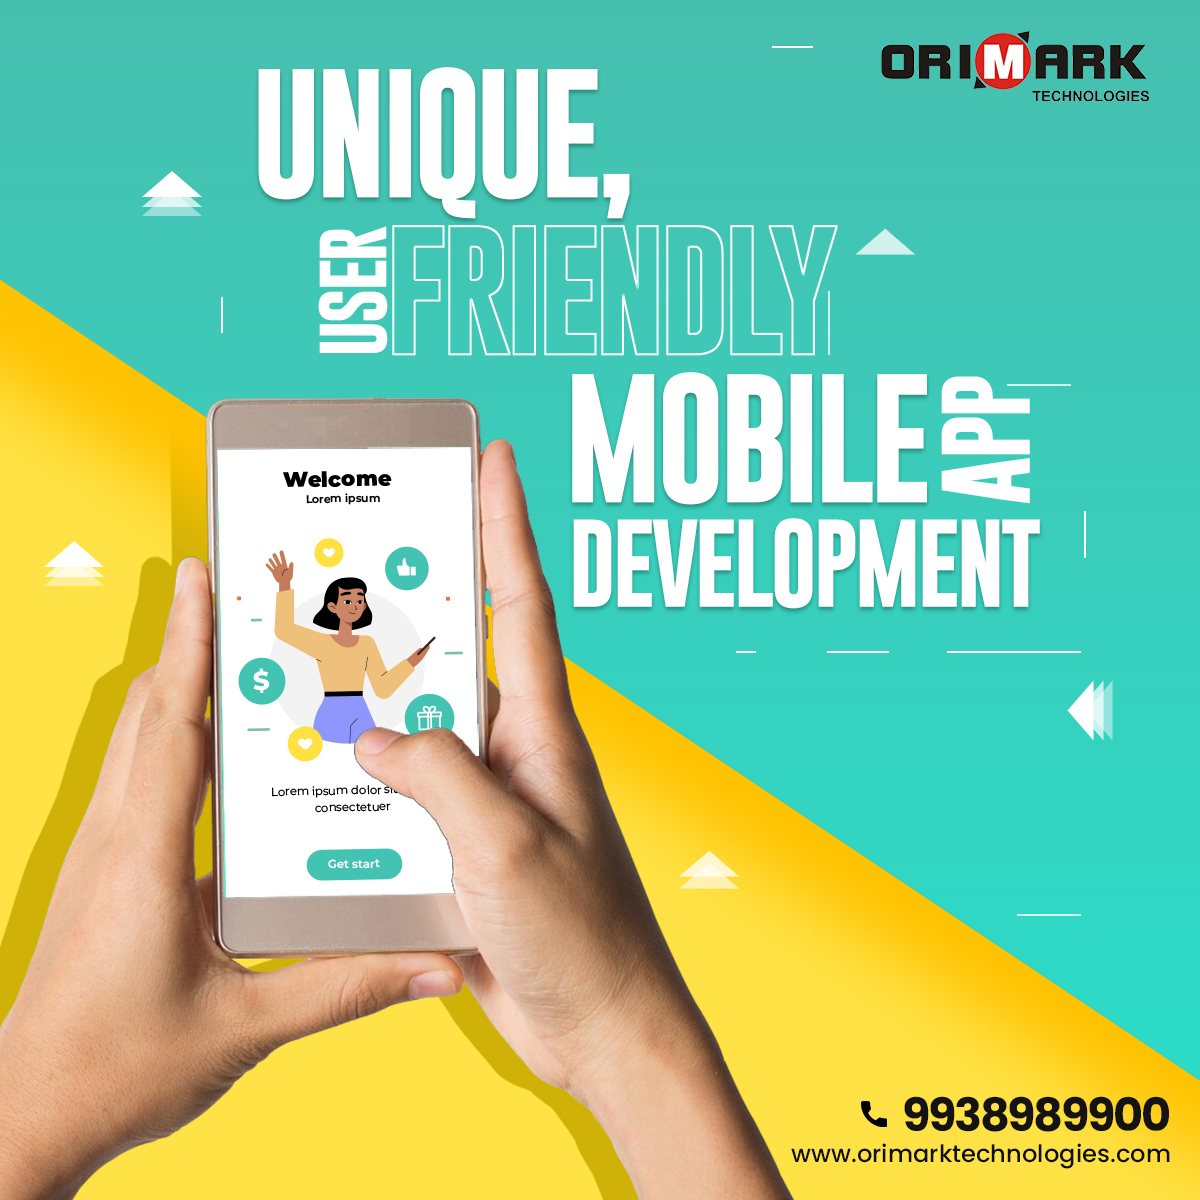 Discover the essence of seamless #mobileappdevelopment with #OrimarkTechnologies! Our team specializes in crafting unique, user-friendly applications tailored to your specific needs and preferences.

Contact us today at 9938989900 to turn your app idea into reality! 

#mobileapp